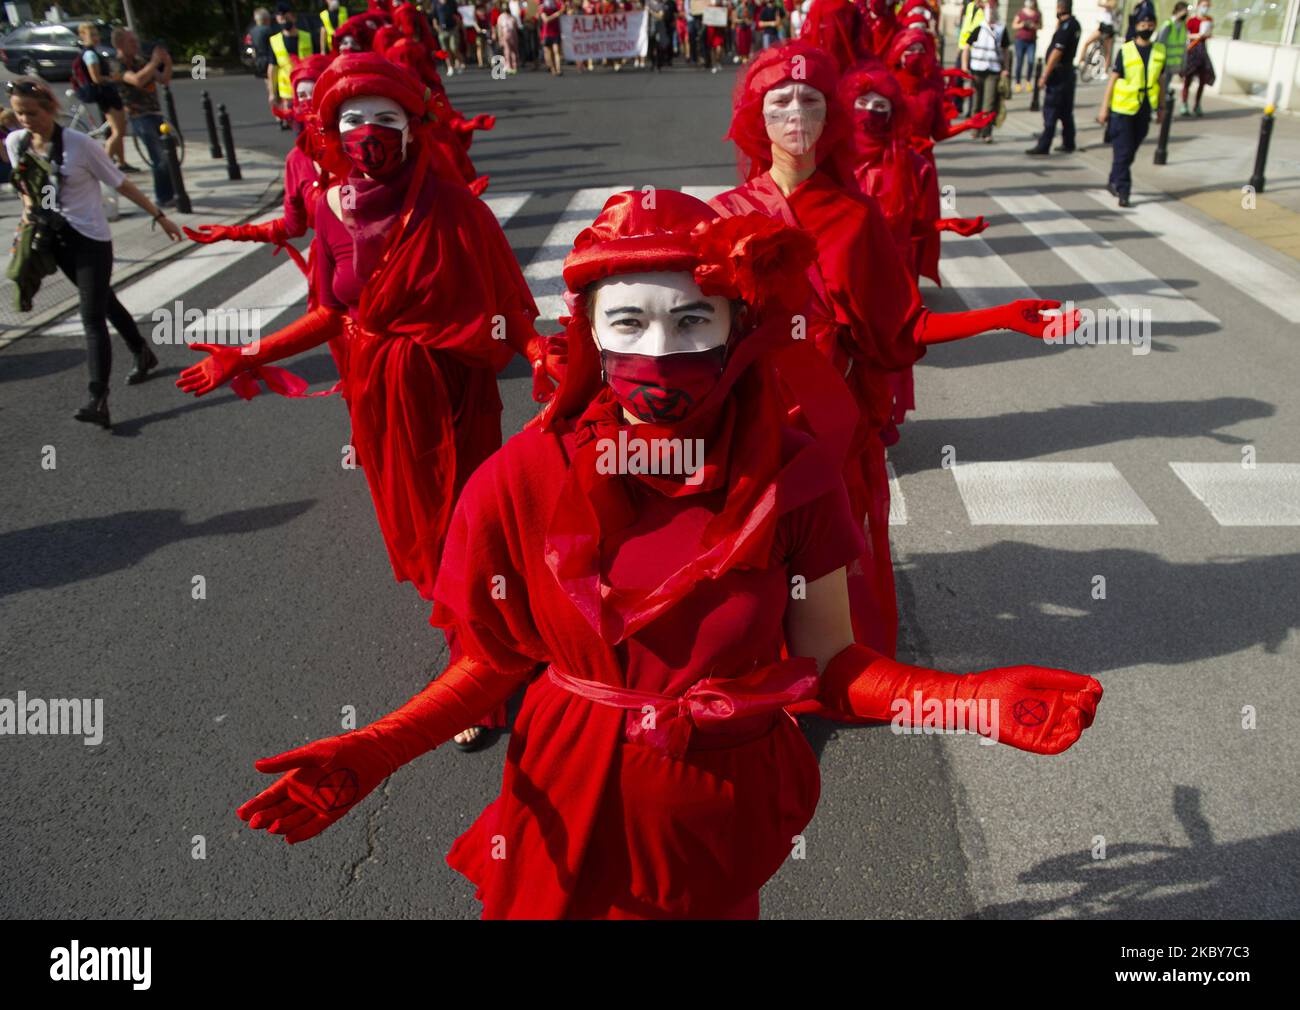 Extinction rebellion activists perform as Red Rebel Brigade during a march gainst climate change on September 5, 2020 in Warsaw, Poland. A few thousand people took the streets in the great march for climate organised by Extinction Rebellion as the start of the climate protests season to demand immediate action from the politics and to raise awareness about climate changes. (Photo by Aleksander Kalka/NurPhoto) Stock Photo